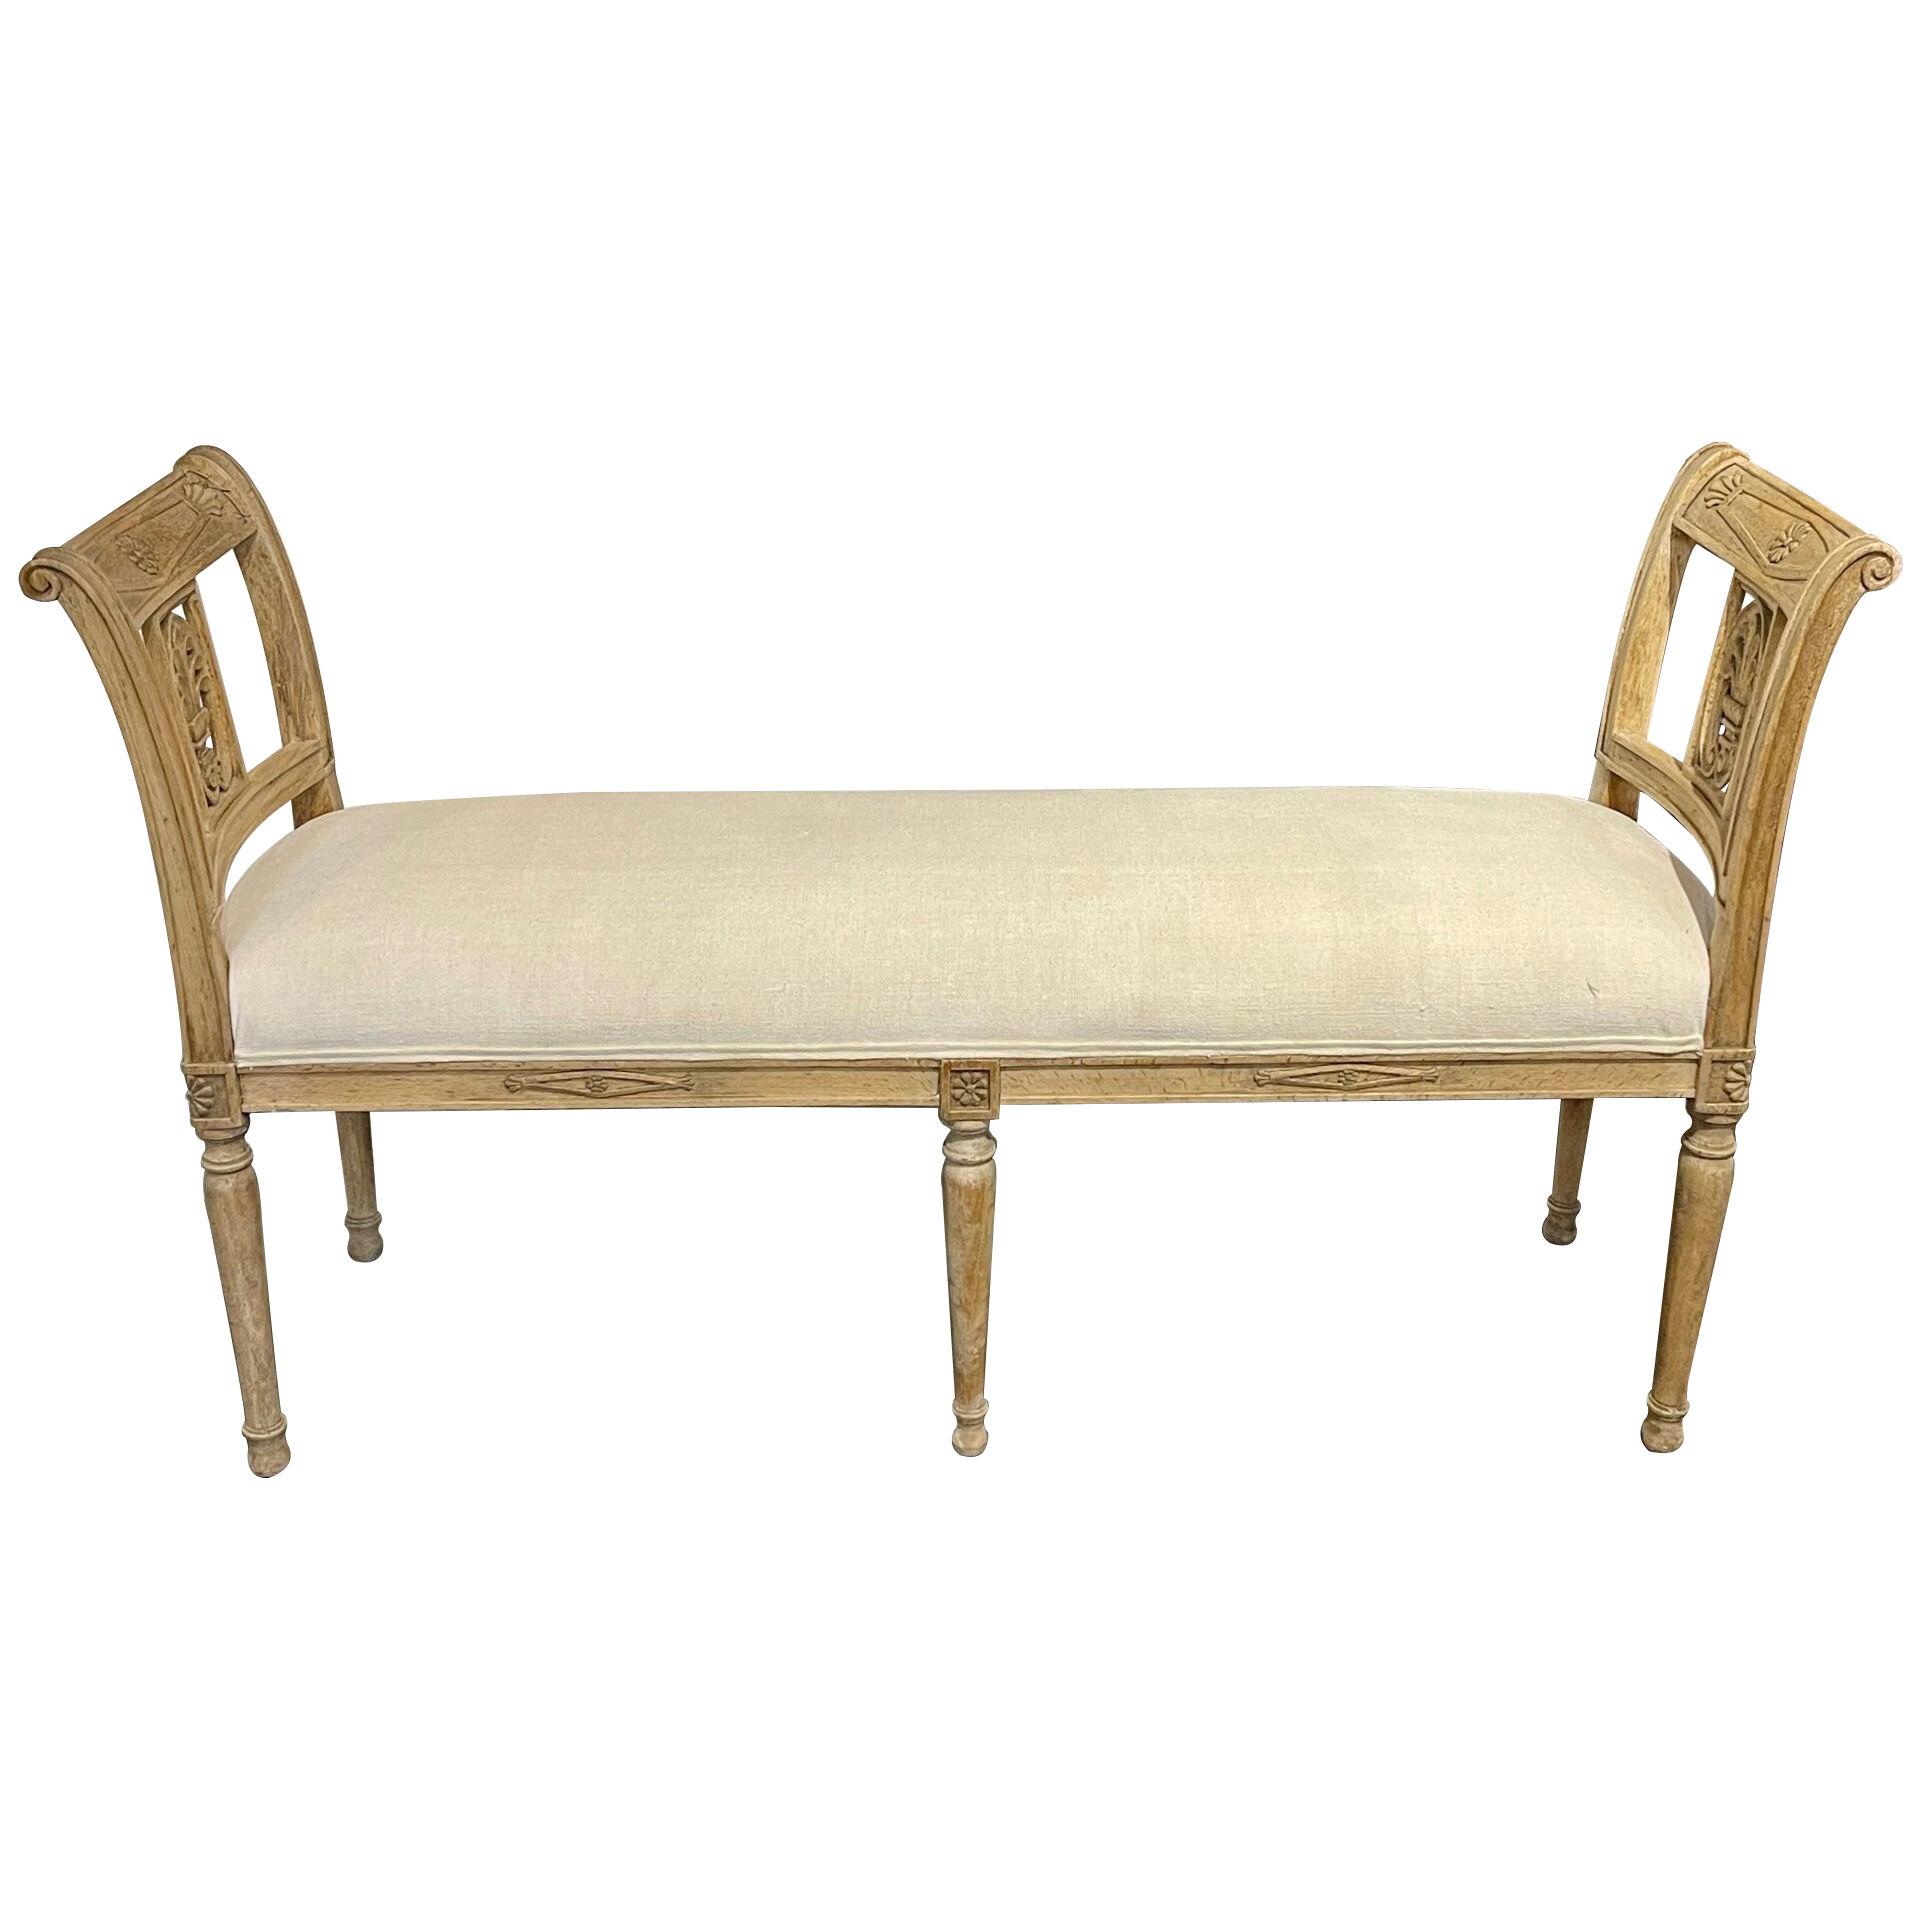 19th Century French Carved and Bleached Directoire Walnut Bench